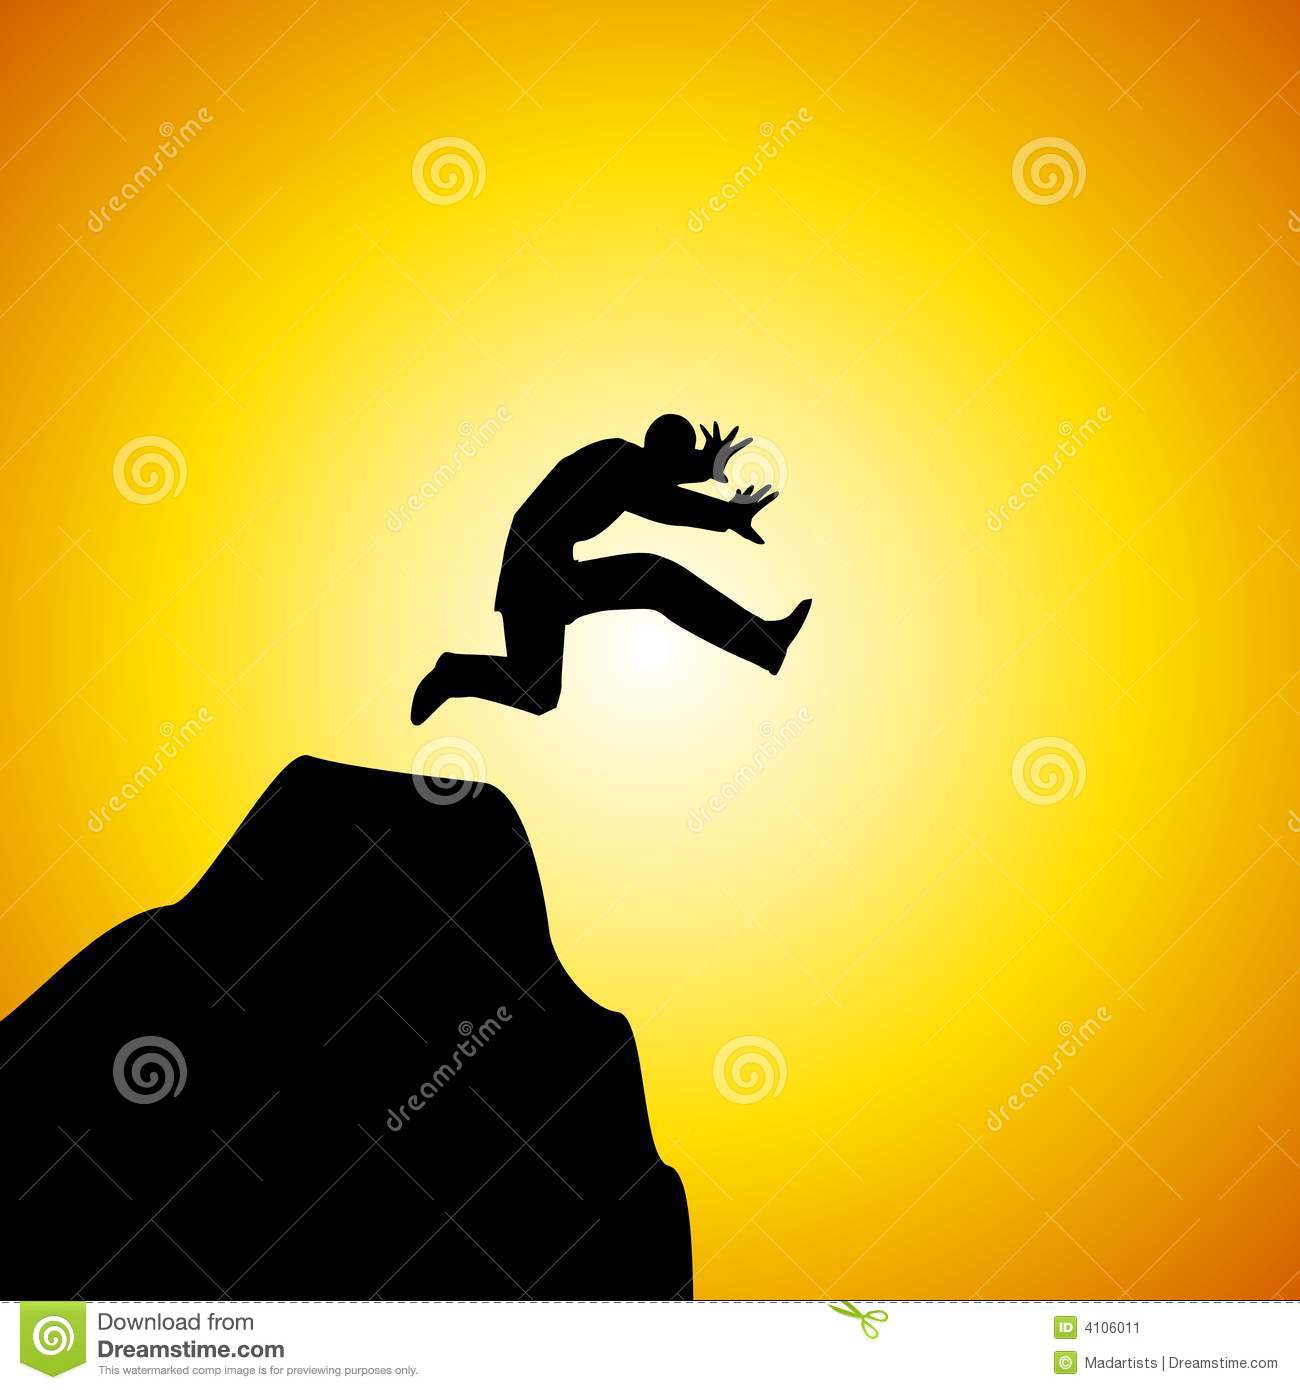 Leap Of Faith Man Jumping Off Mountain Stock Image   Image  4106011